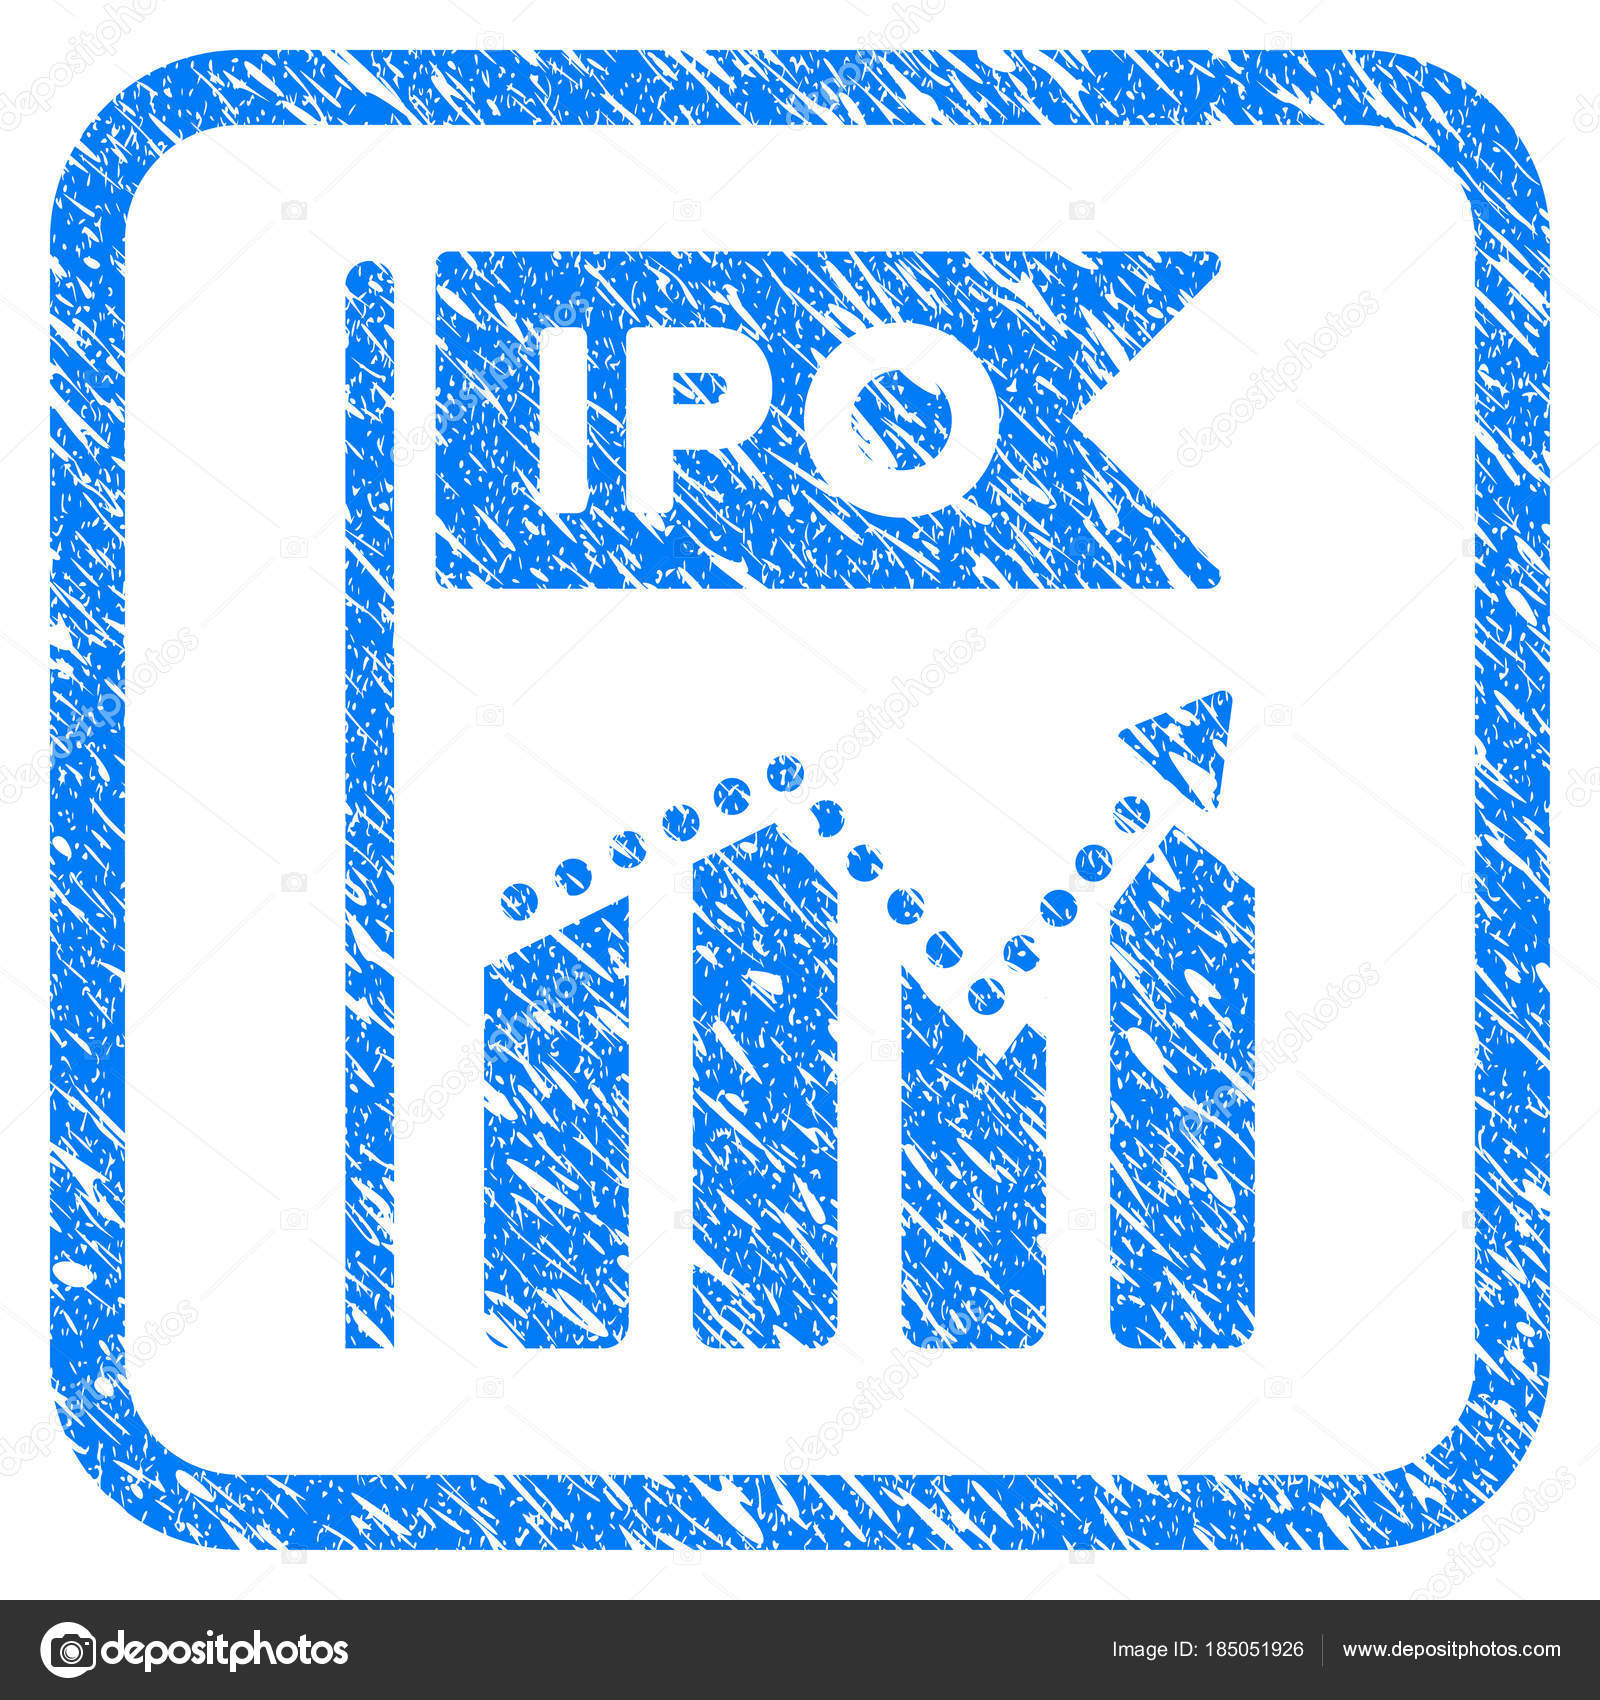 How To Do An Ipo Chart